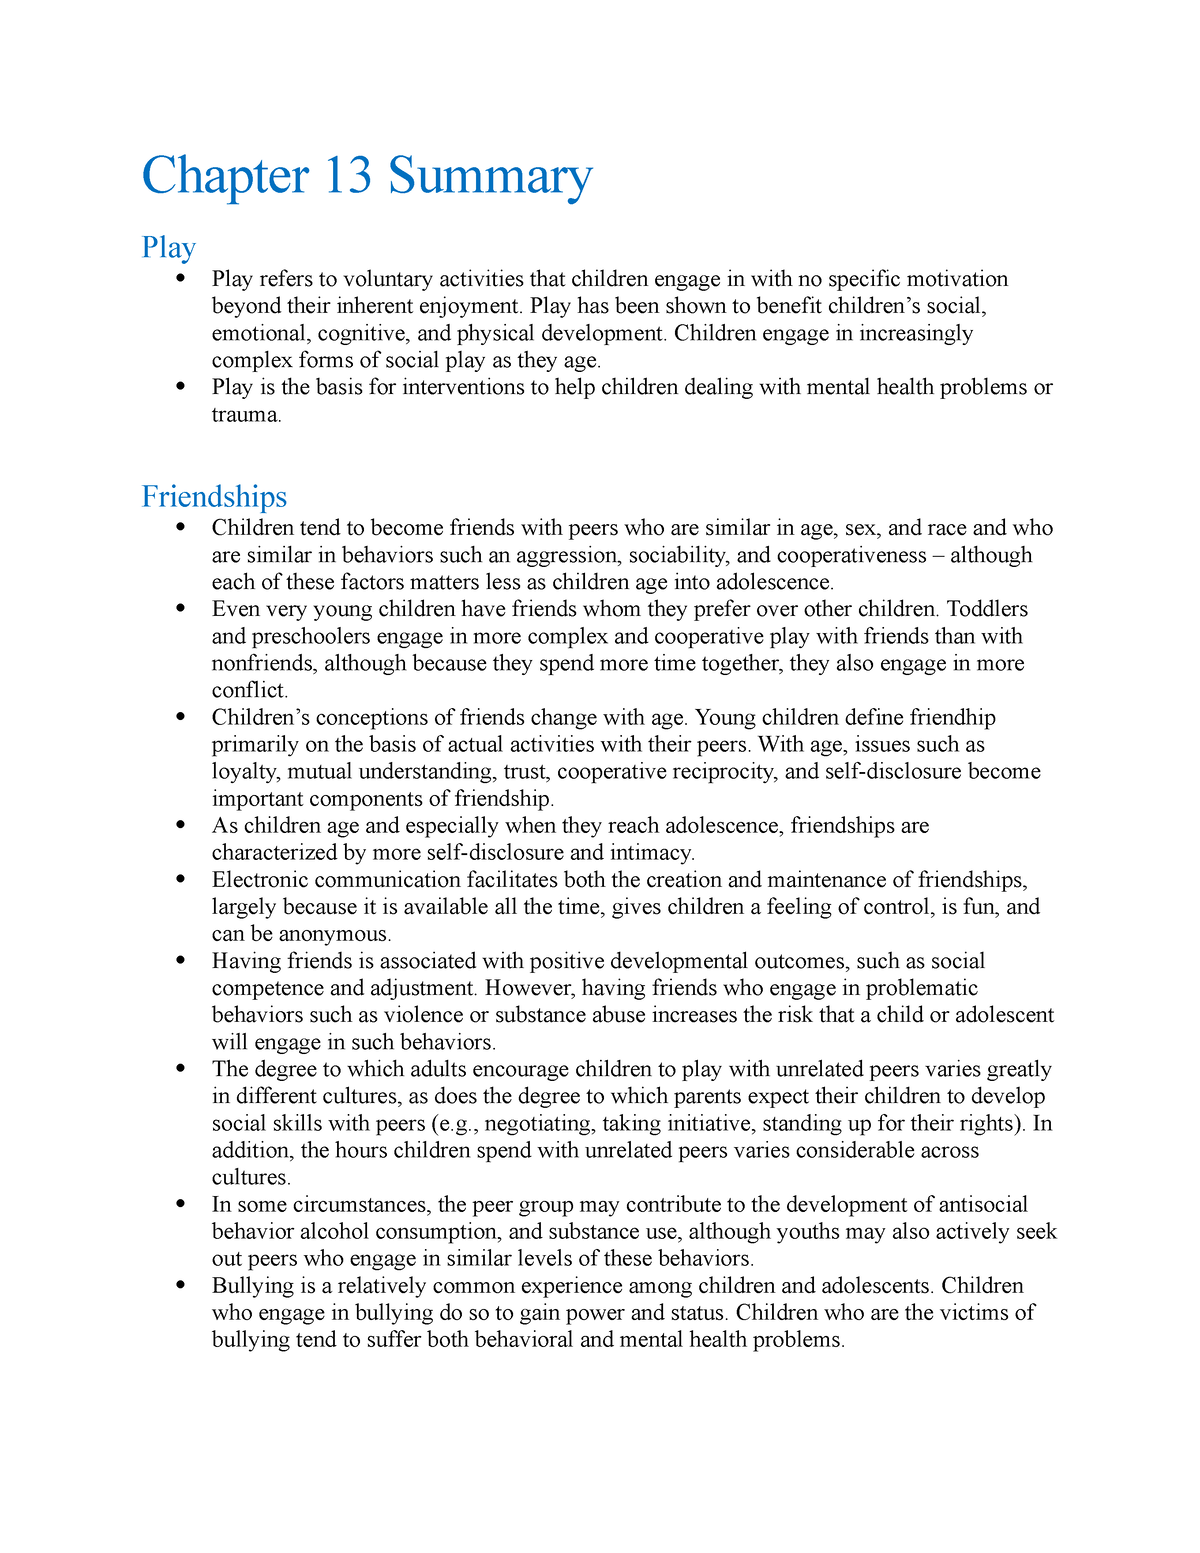 Chapter 13 Summary - How Children Develop - Chapter 13 Summary Play ...